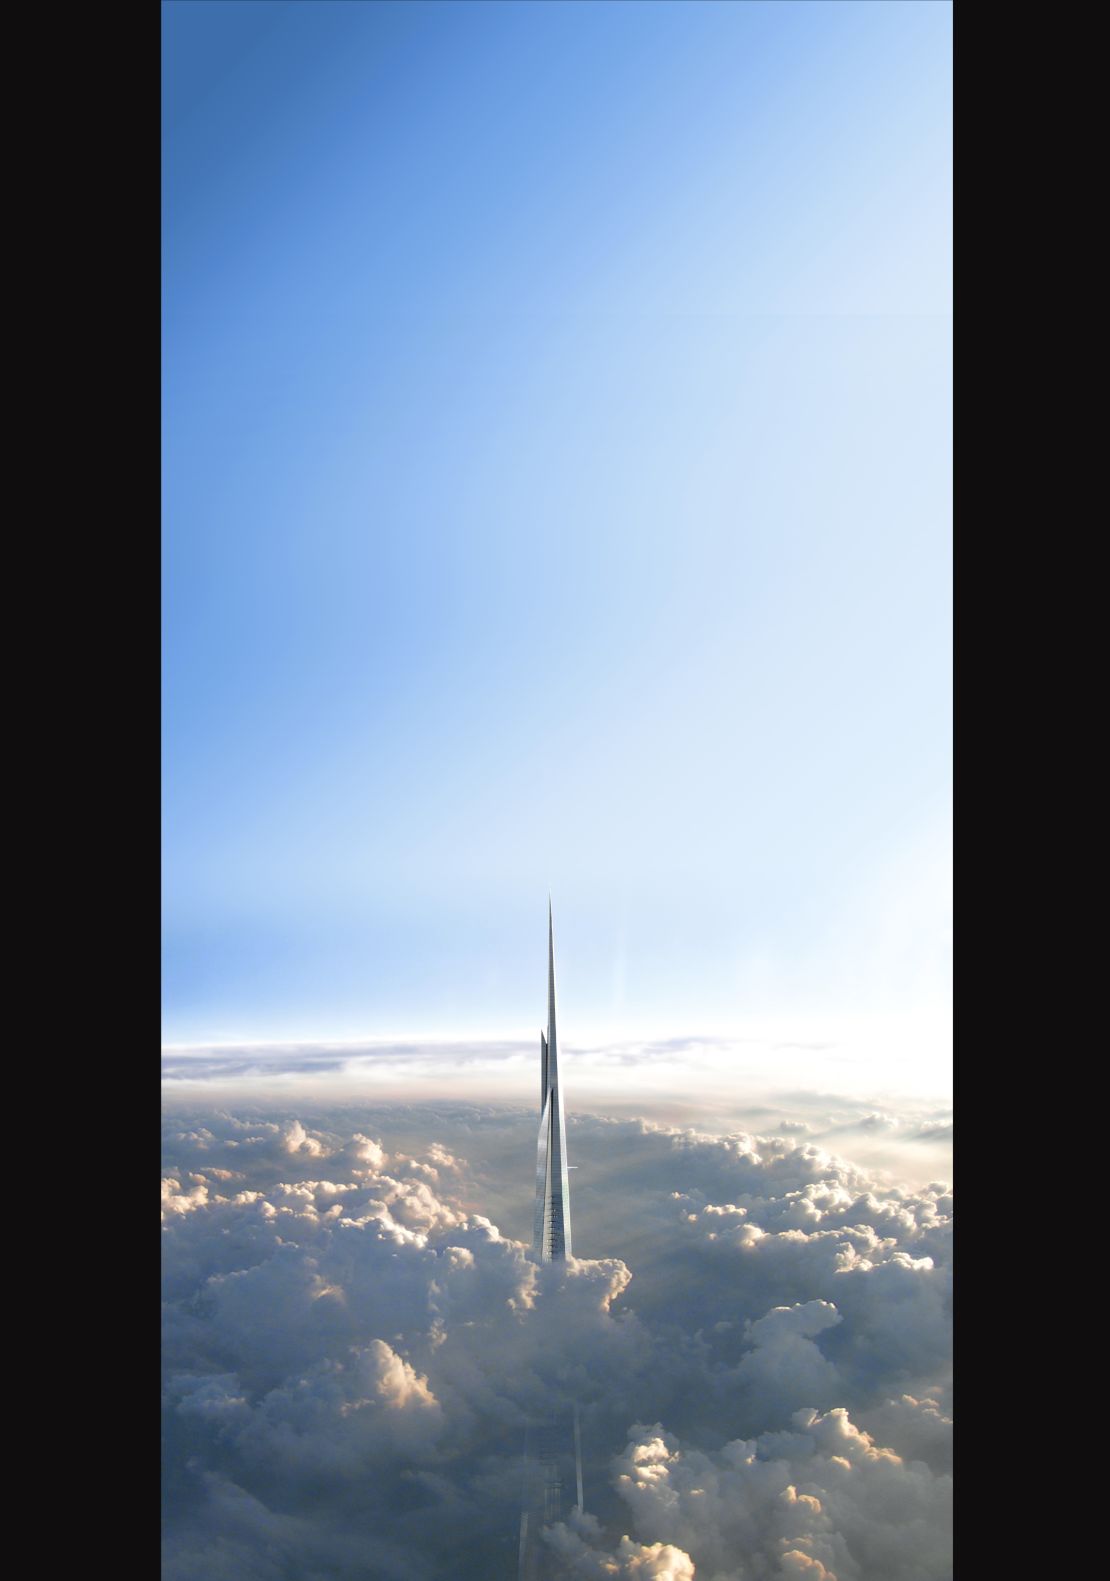 The Jeddah Tower, under construction, will eventually become the world's tallest building and the first manmade structure to surpass one thousand meters.